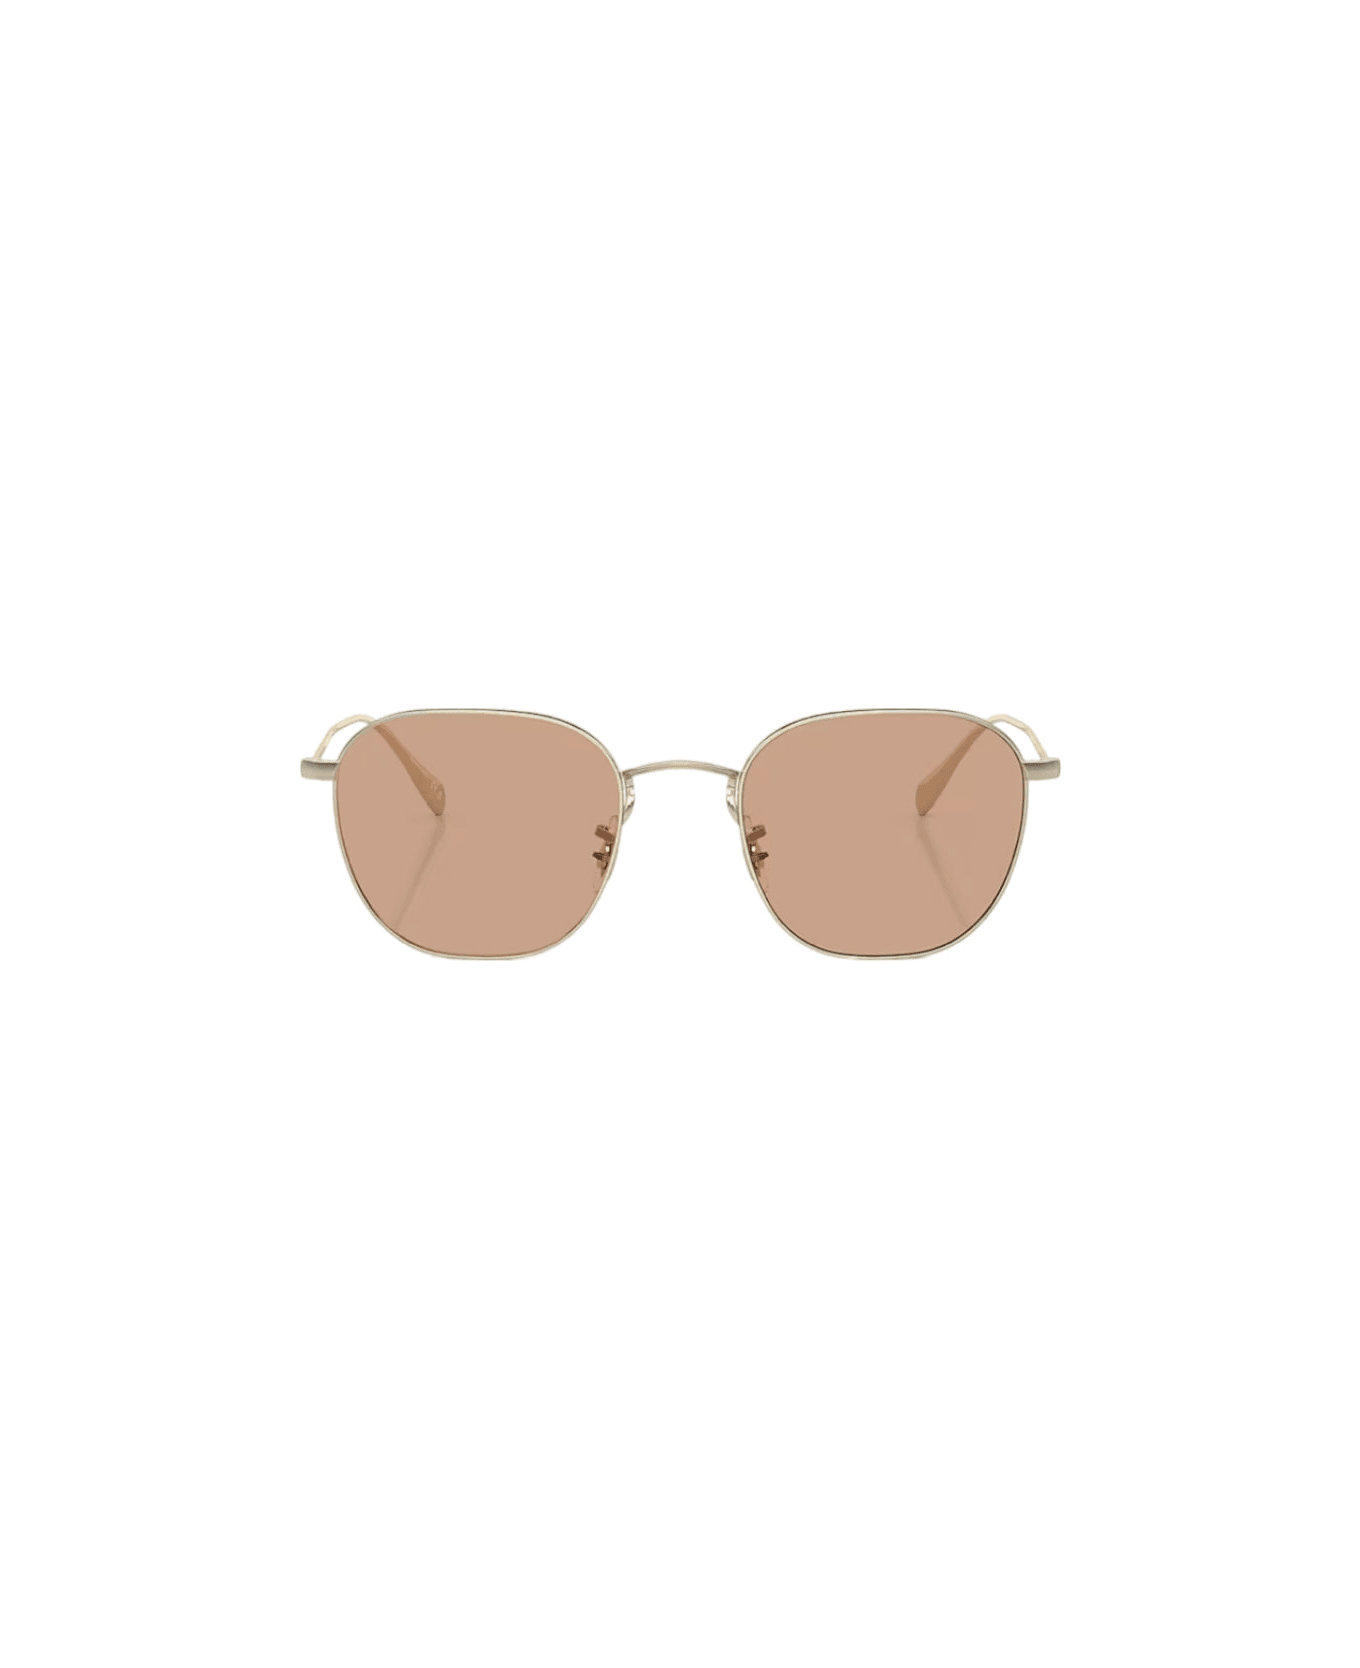 Oliver Peoples Clyne - Gold Sunglasses サングラス